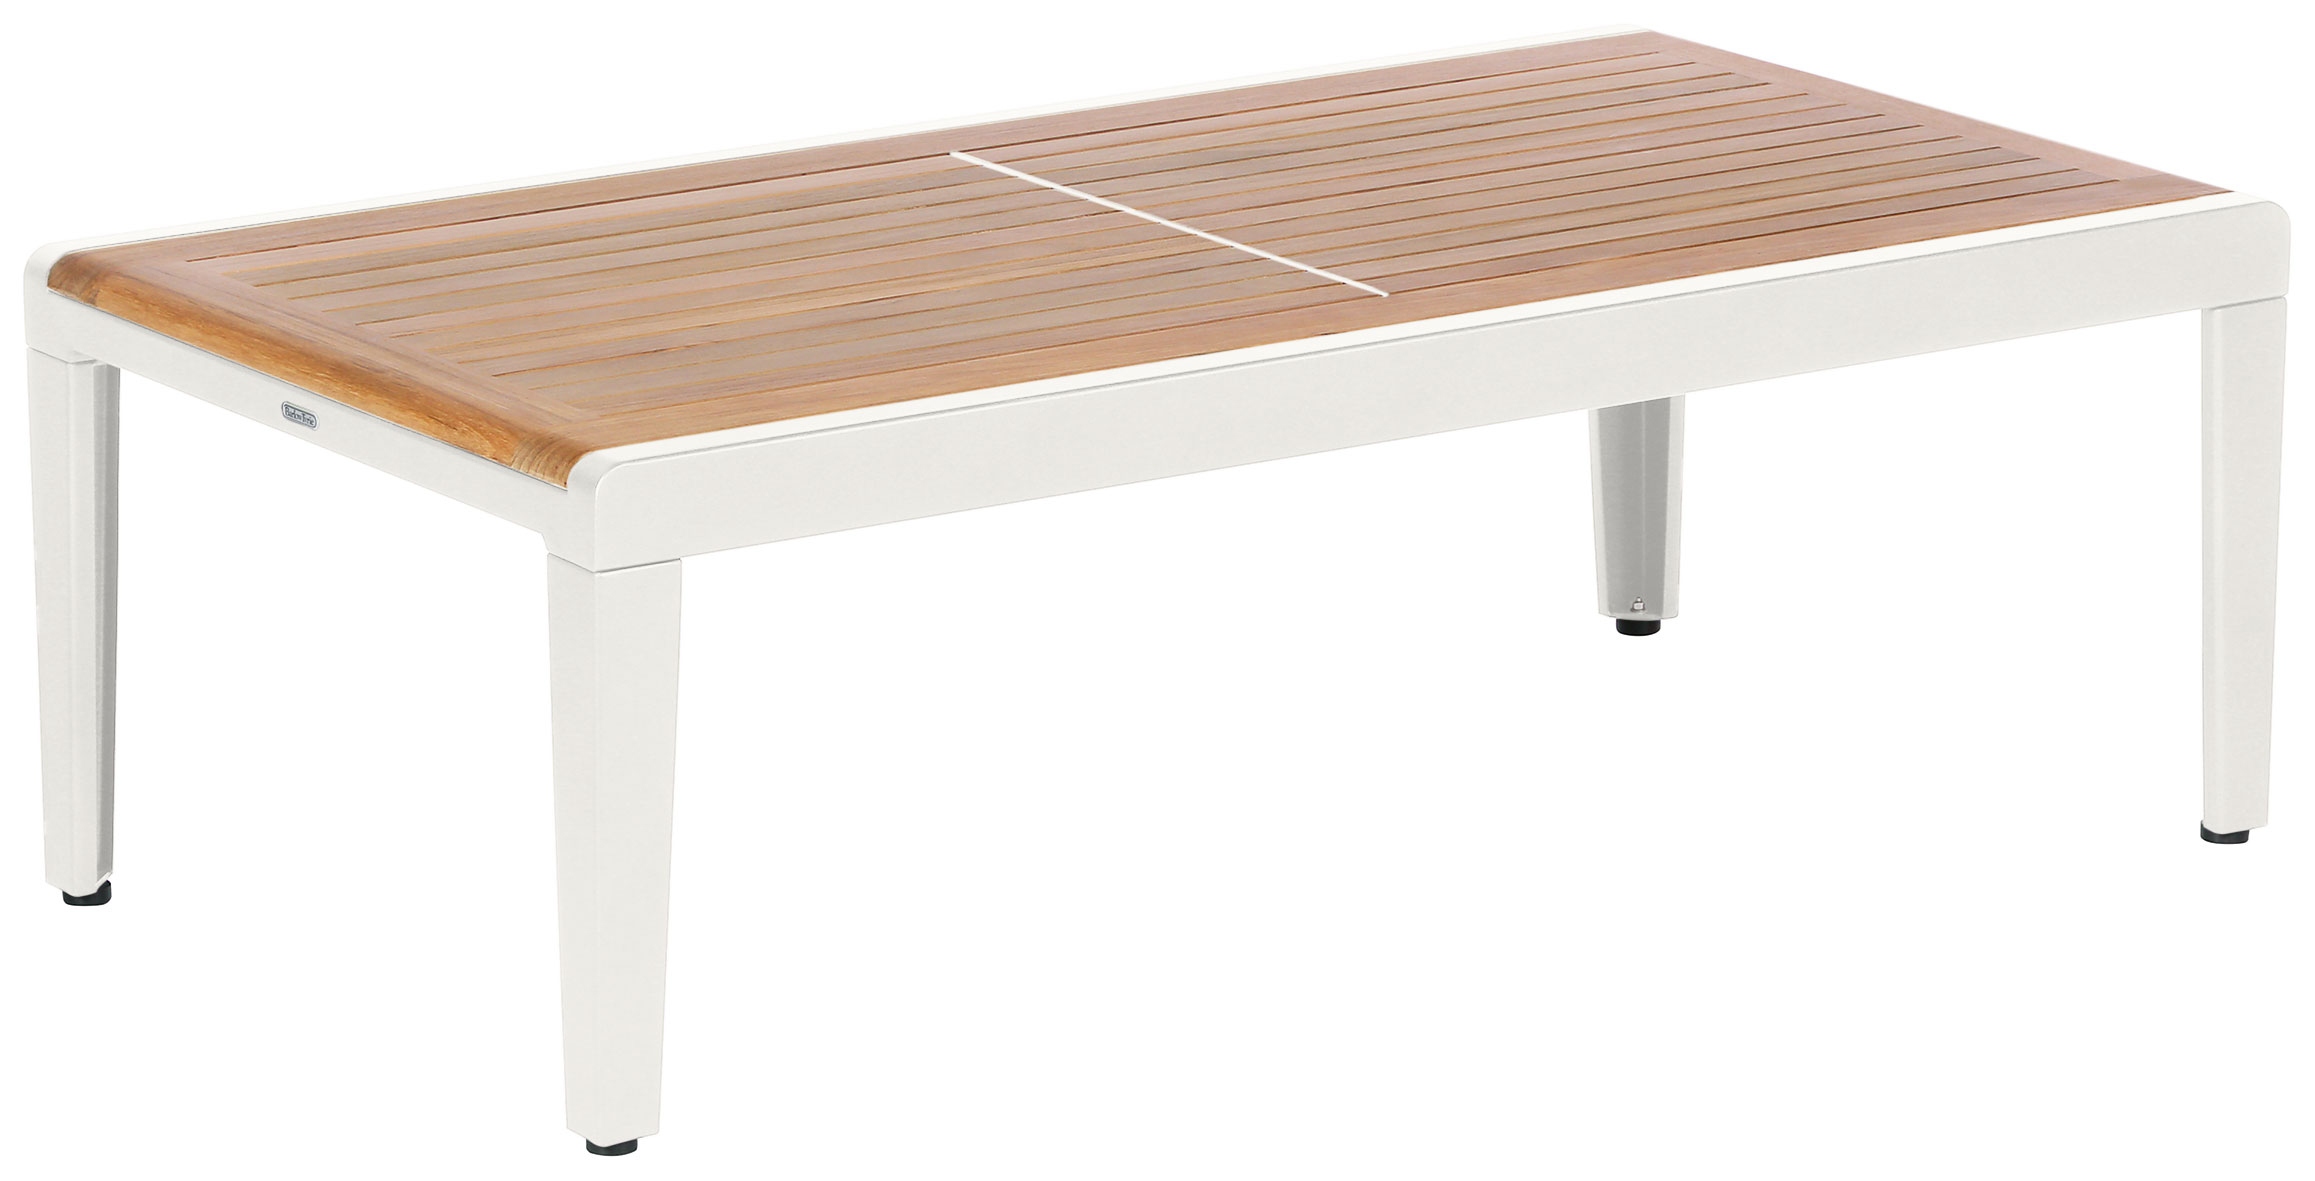 Barlow Tyrie Aura Teak and Aluminum Low Coffee Table 120